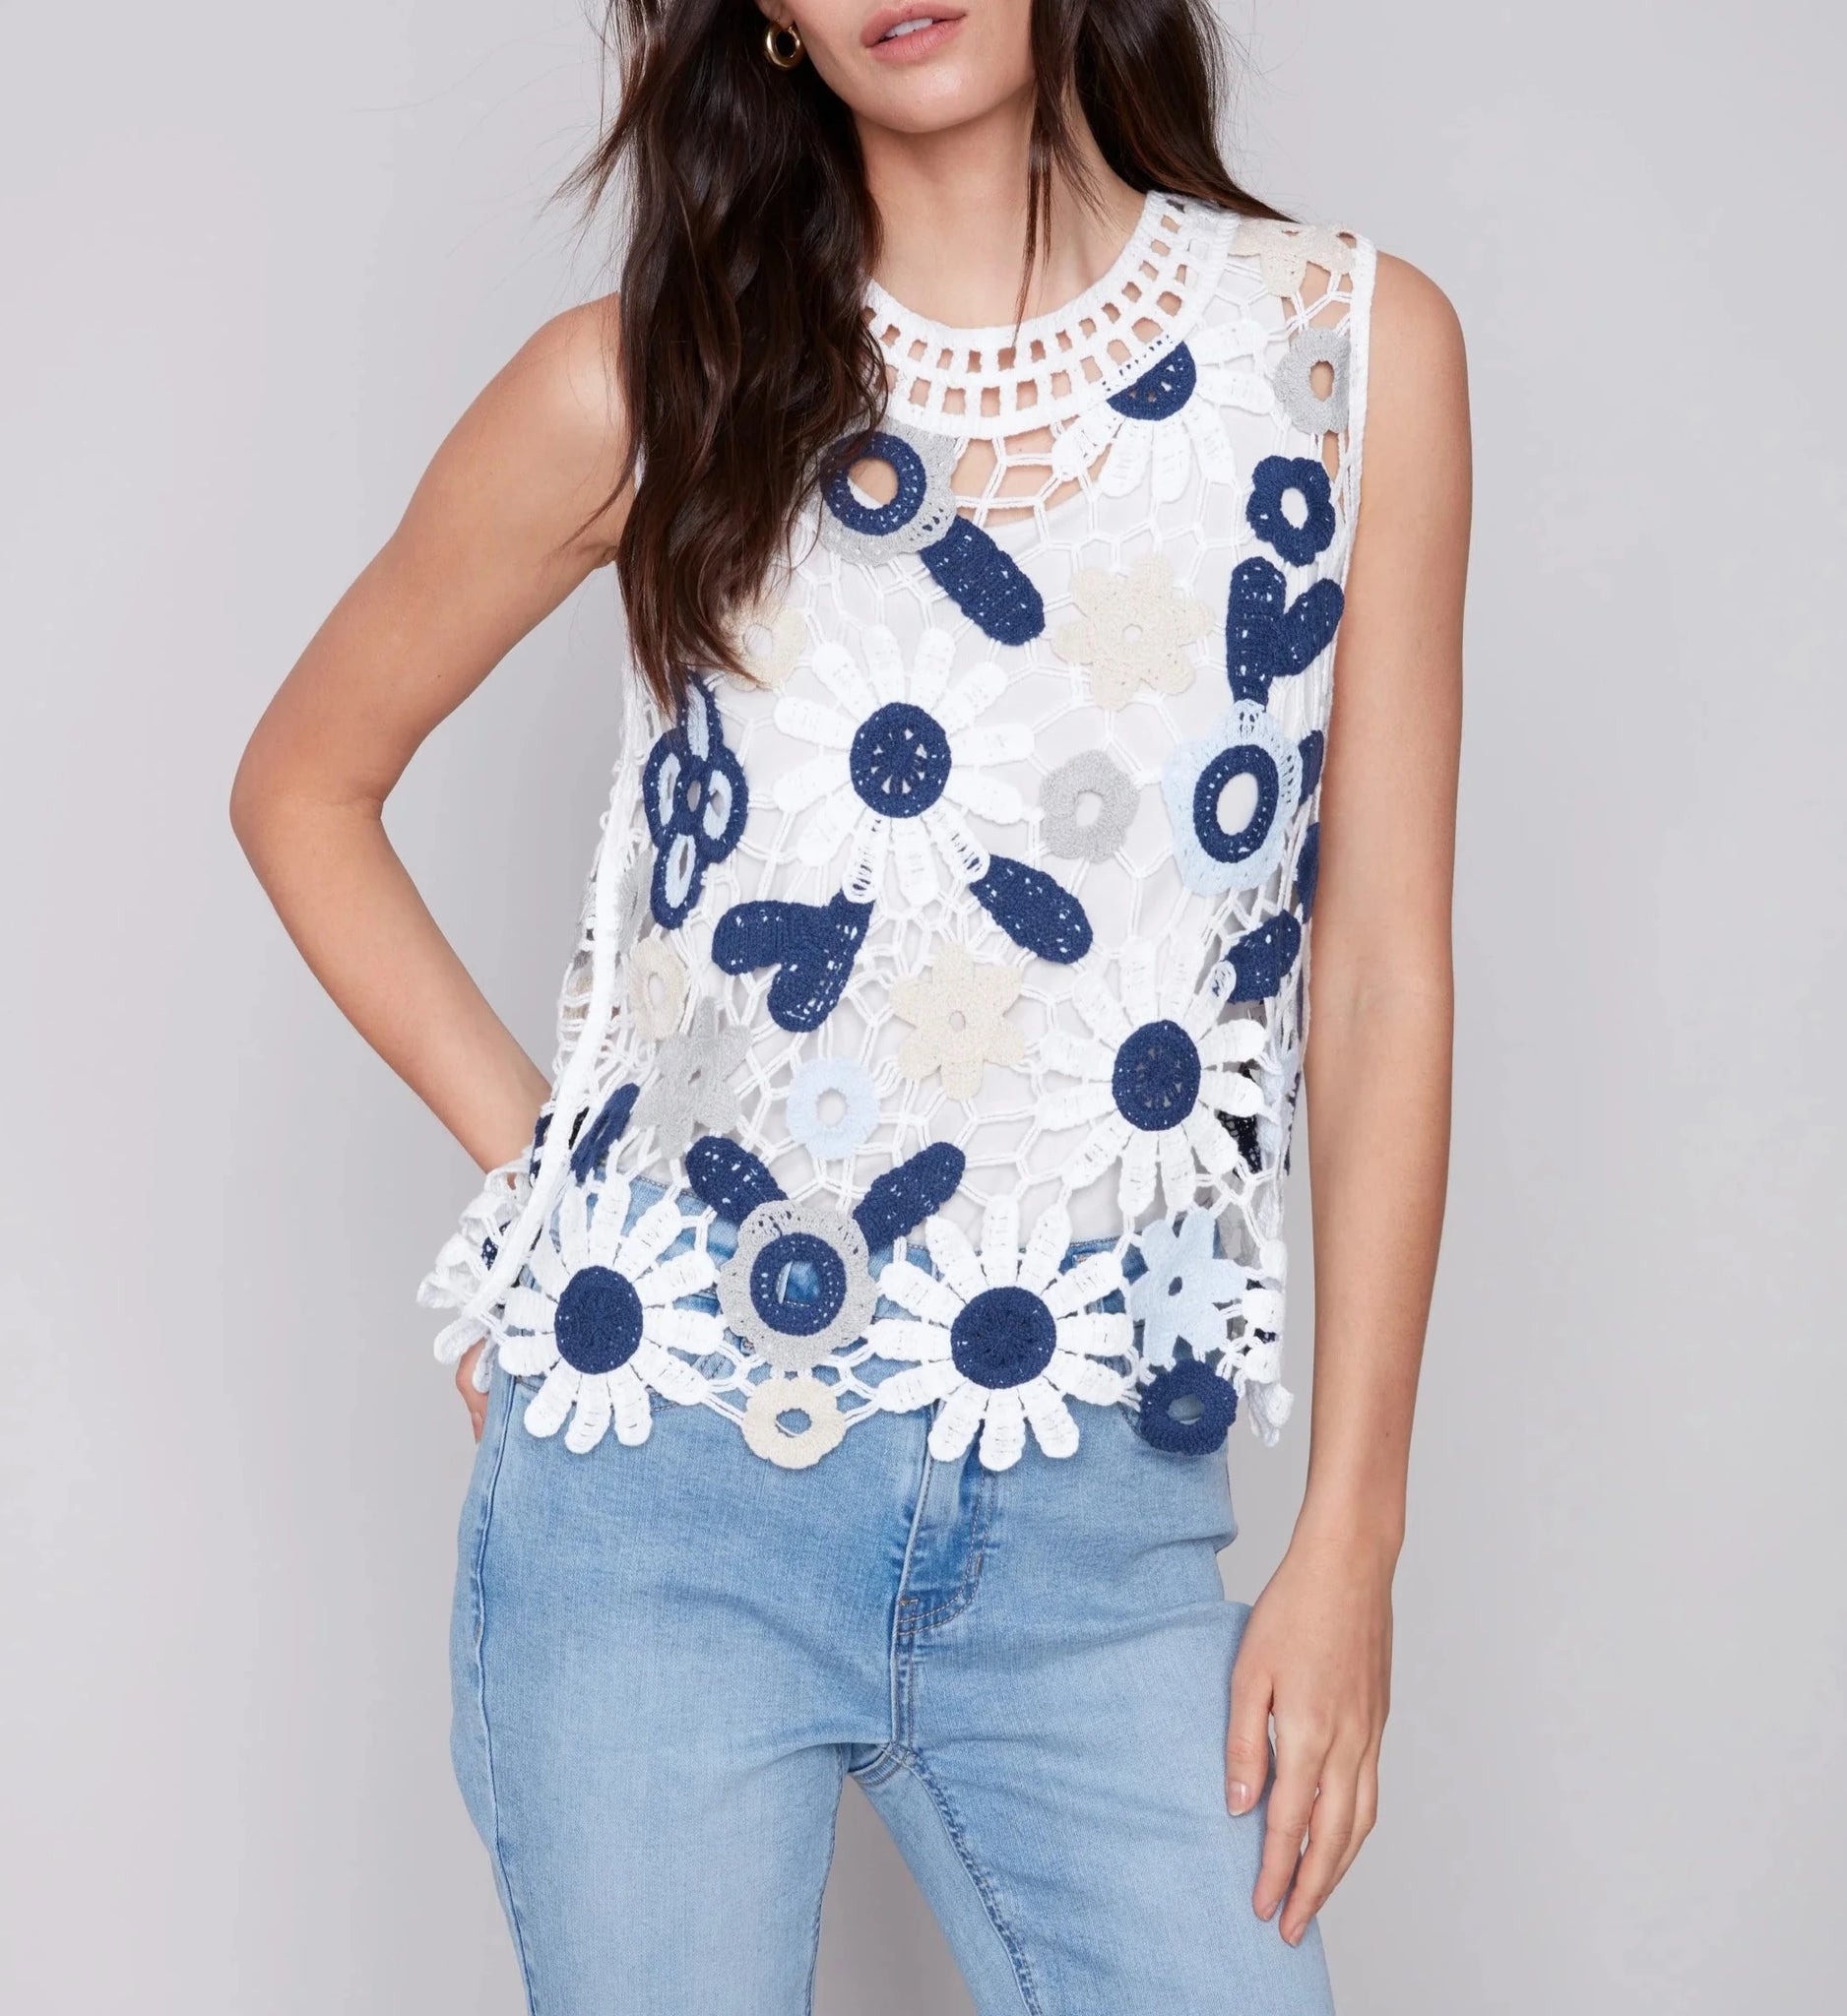 Sleeveless Crochet Top with Floral Pattern - Celadon